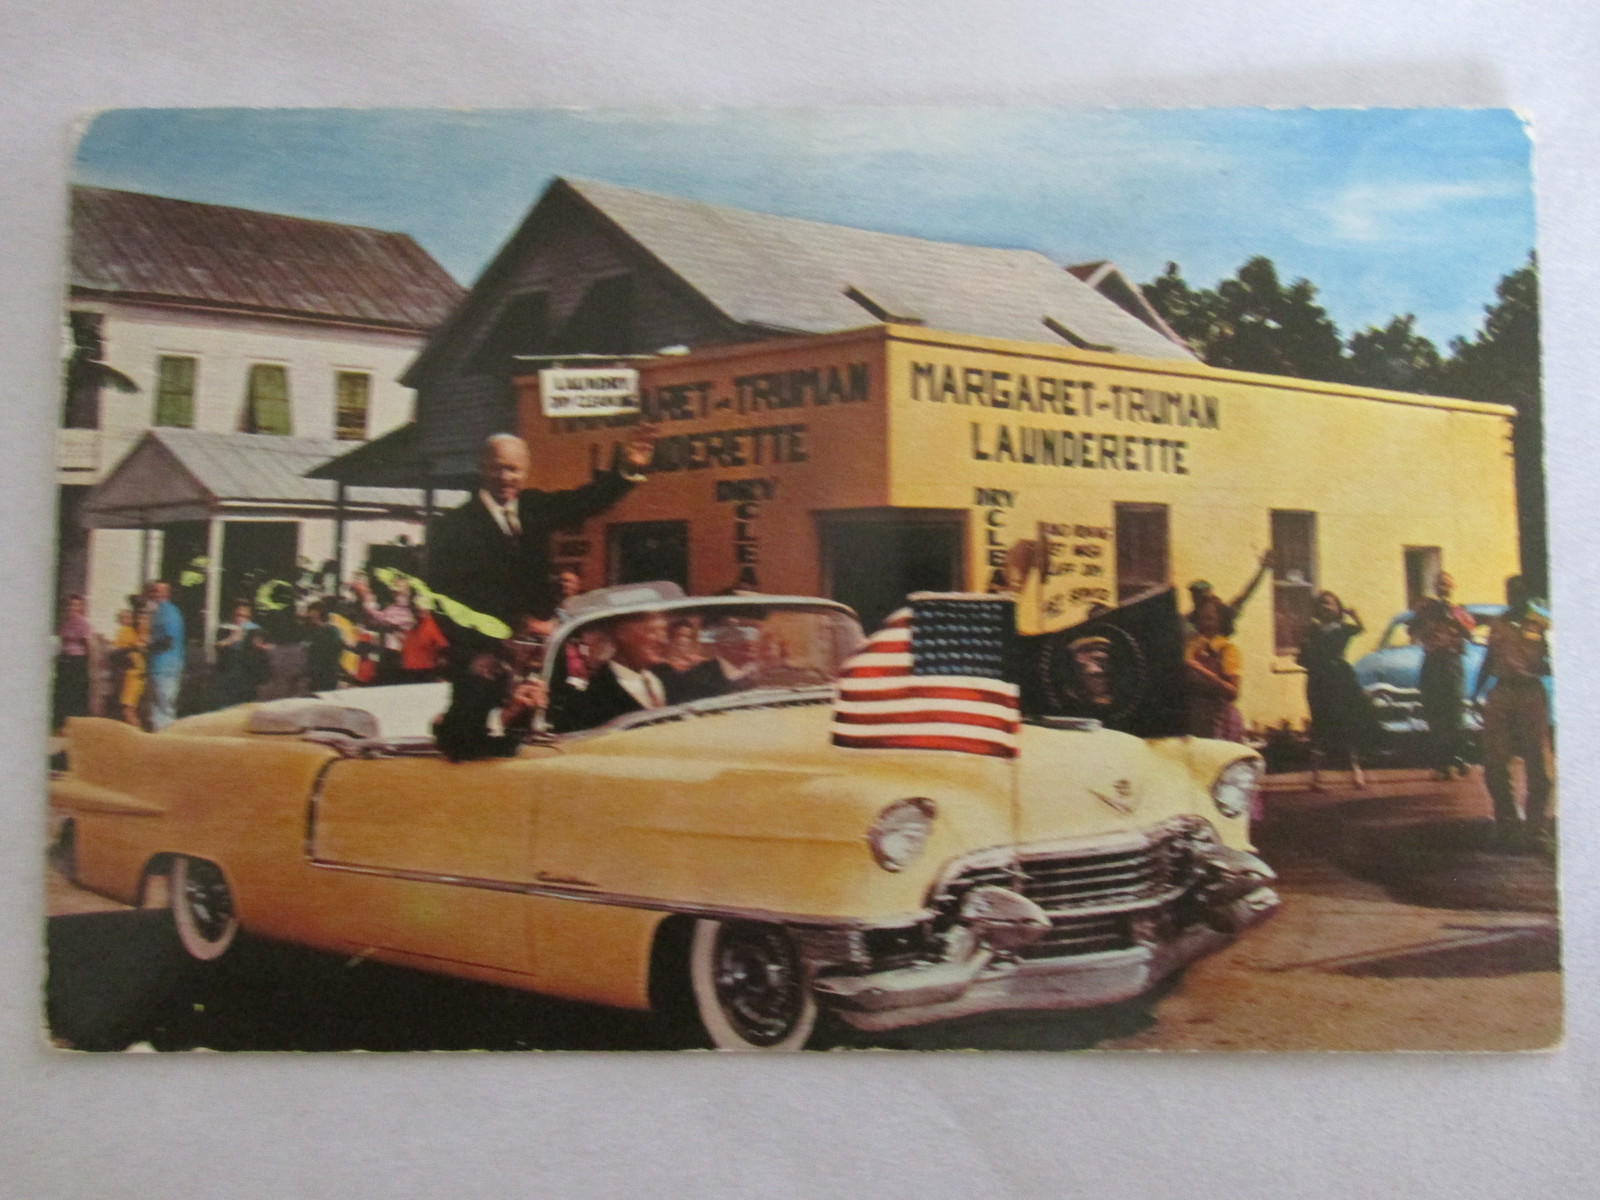 Primary image for 1950s Real Photo Postcard - Dwight D. Eisenhower Visiting Key West, Florida